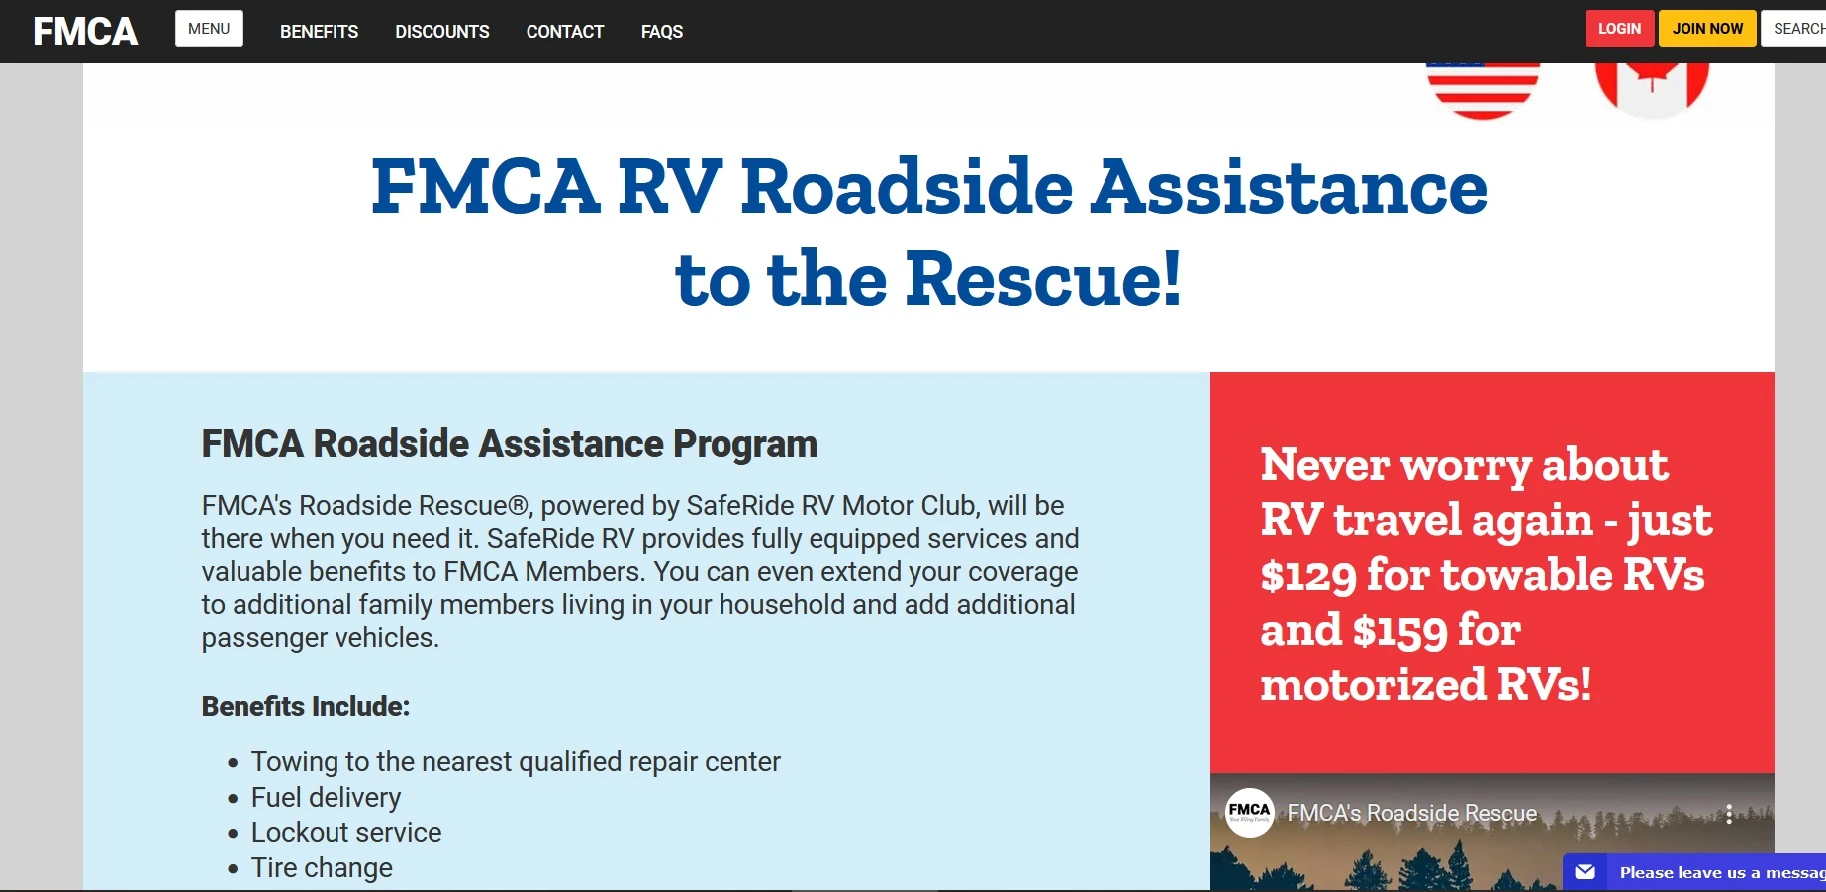 FMCA offers roadside assistance plans to its members.